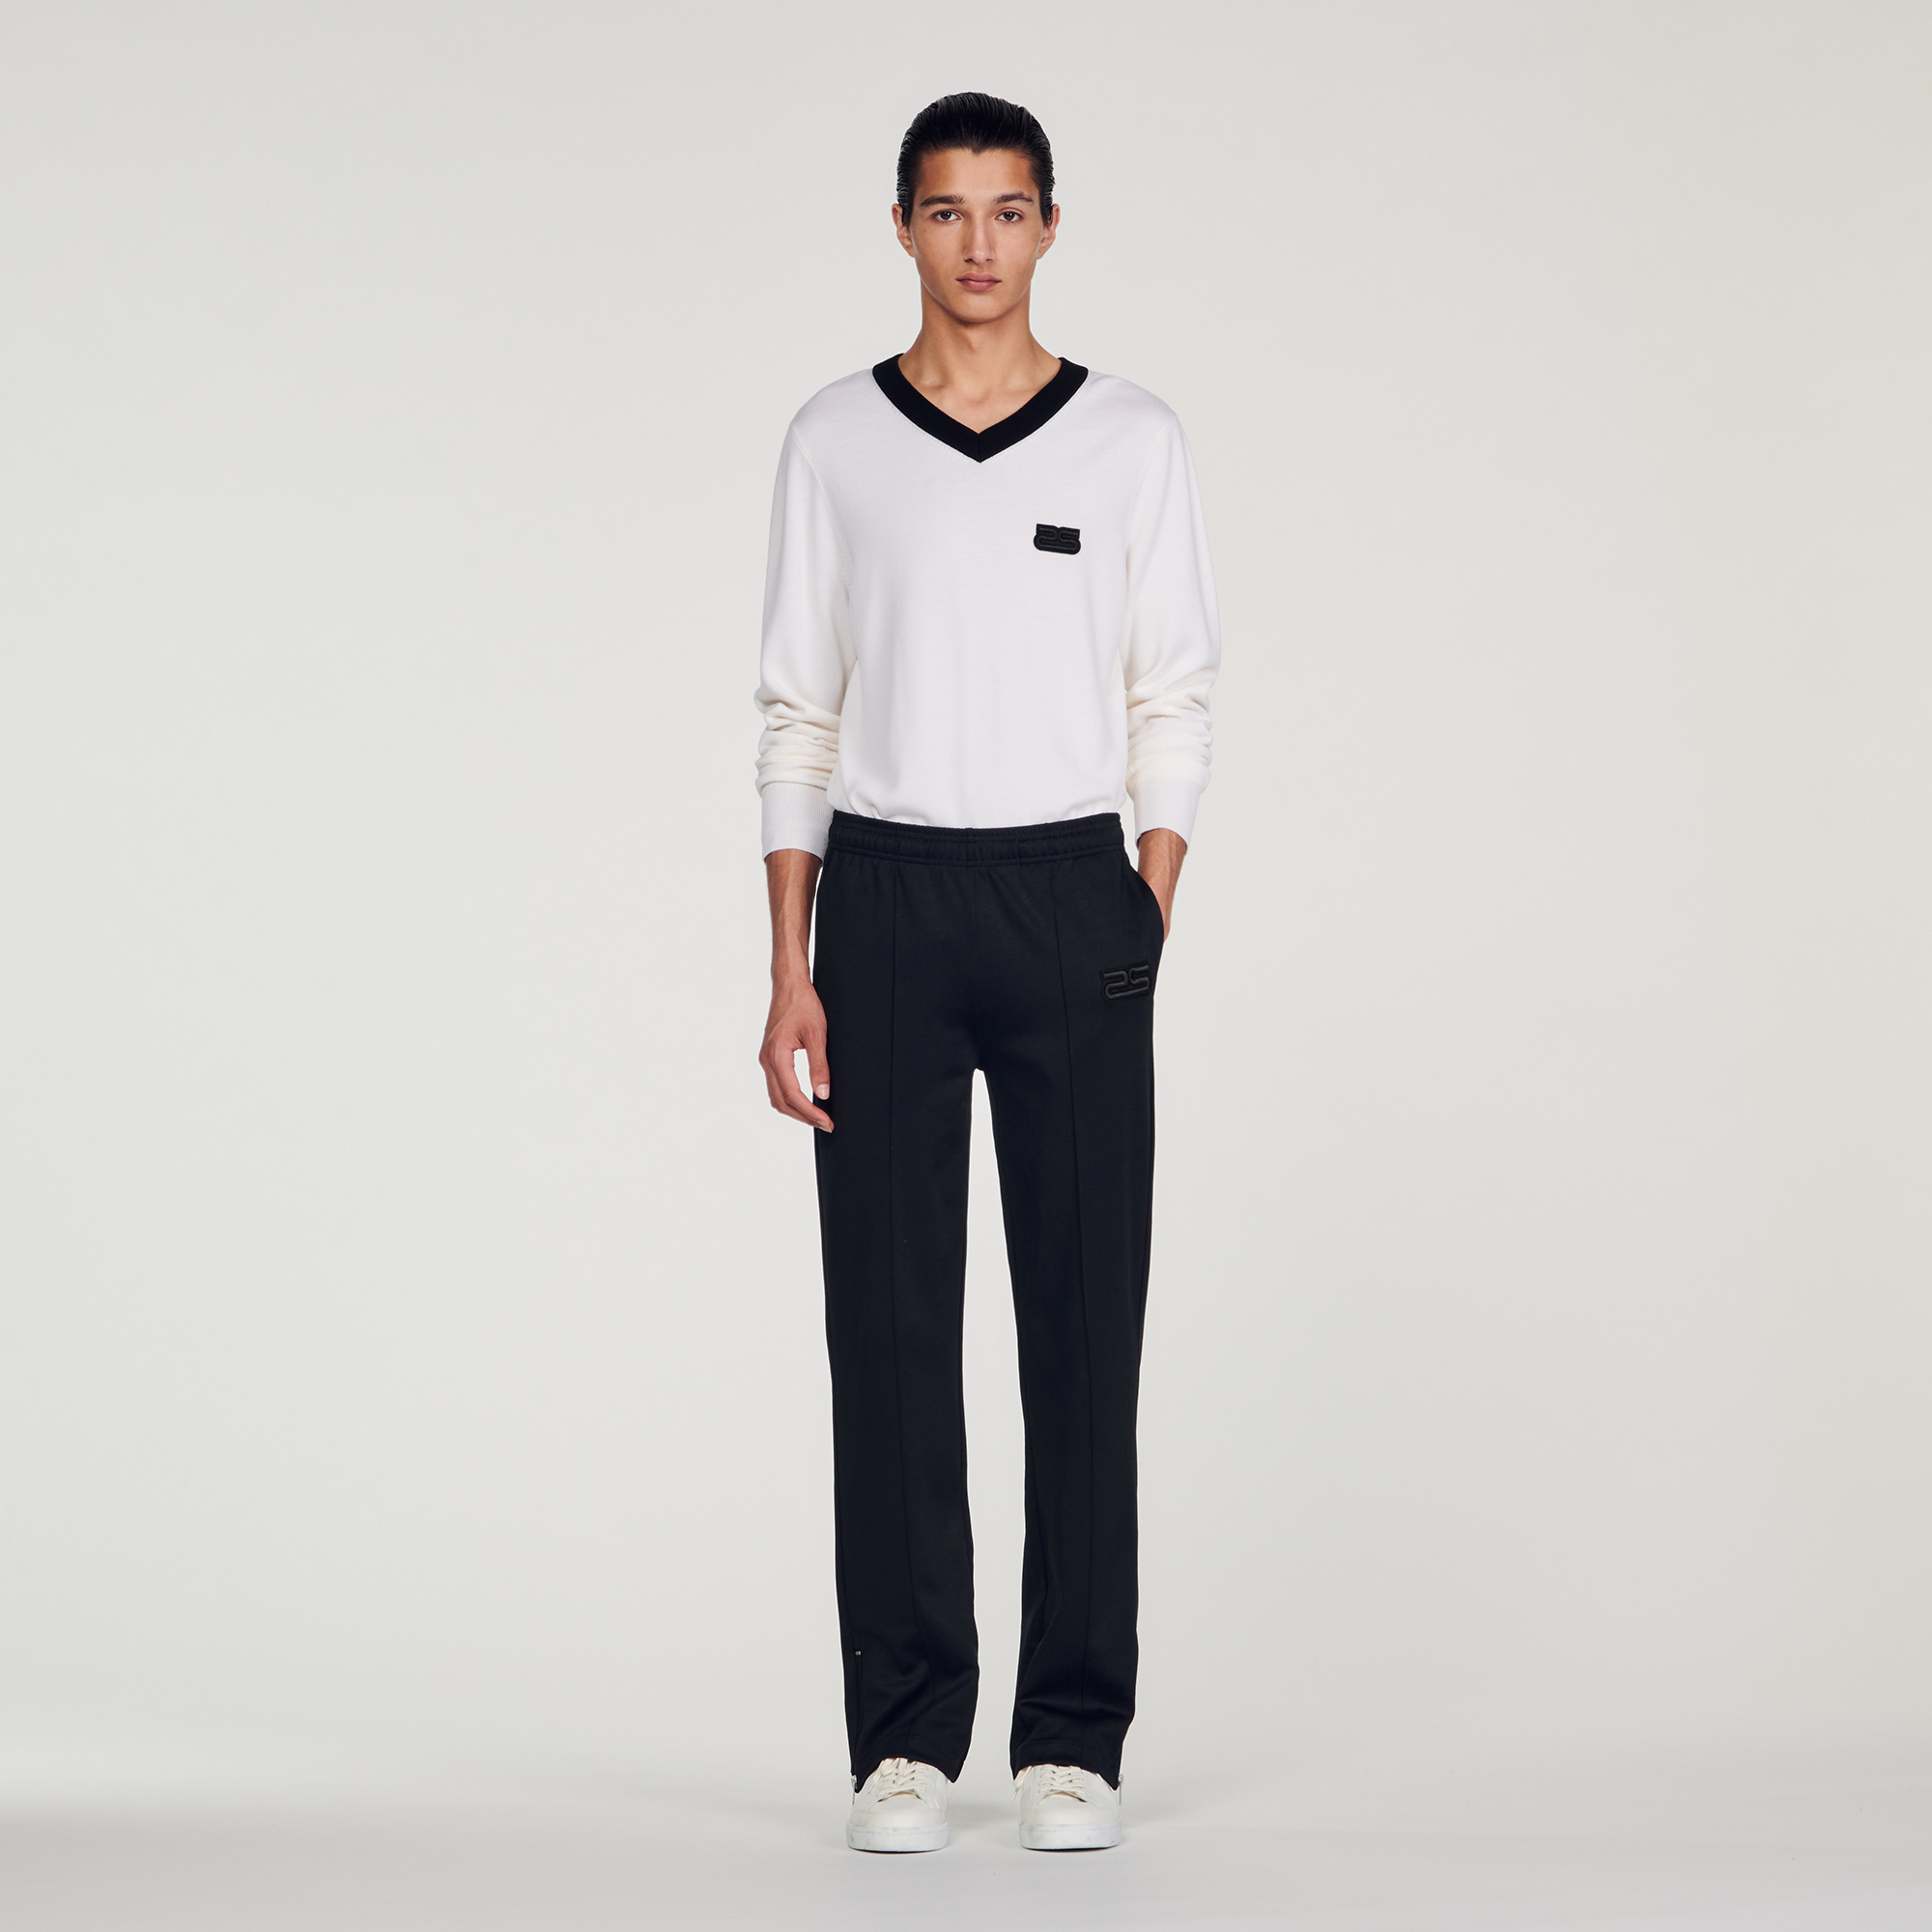 Sandro polyester Technical jersey jogging bottoms with elasticated waistband, side pockets and embellished with tone-on-tone double S embroidery